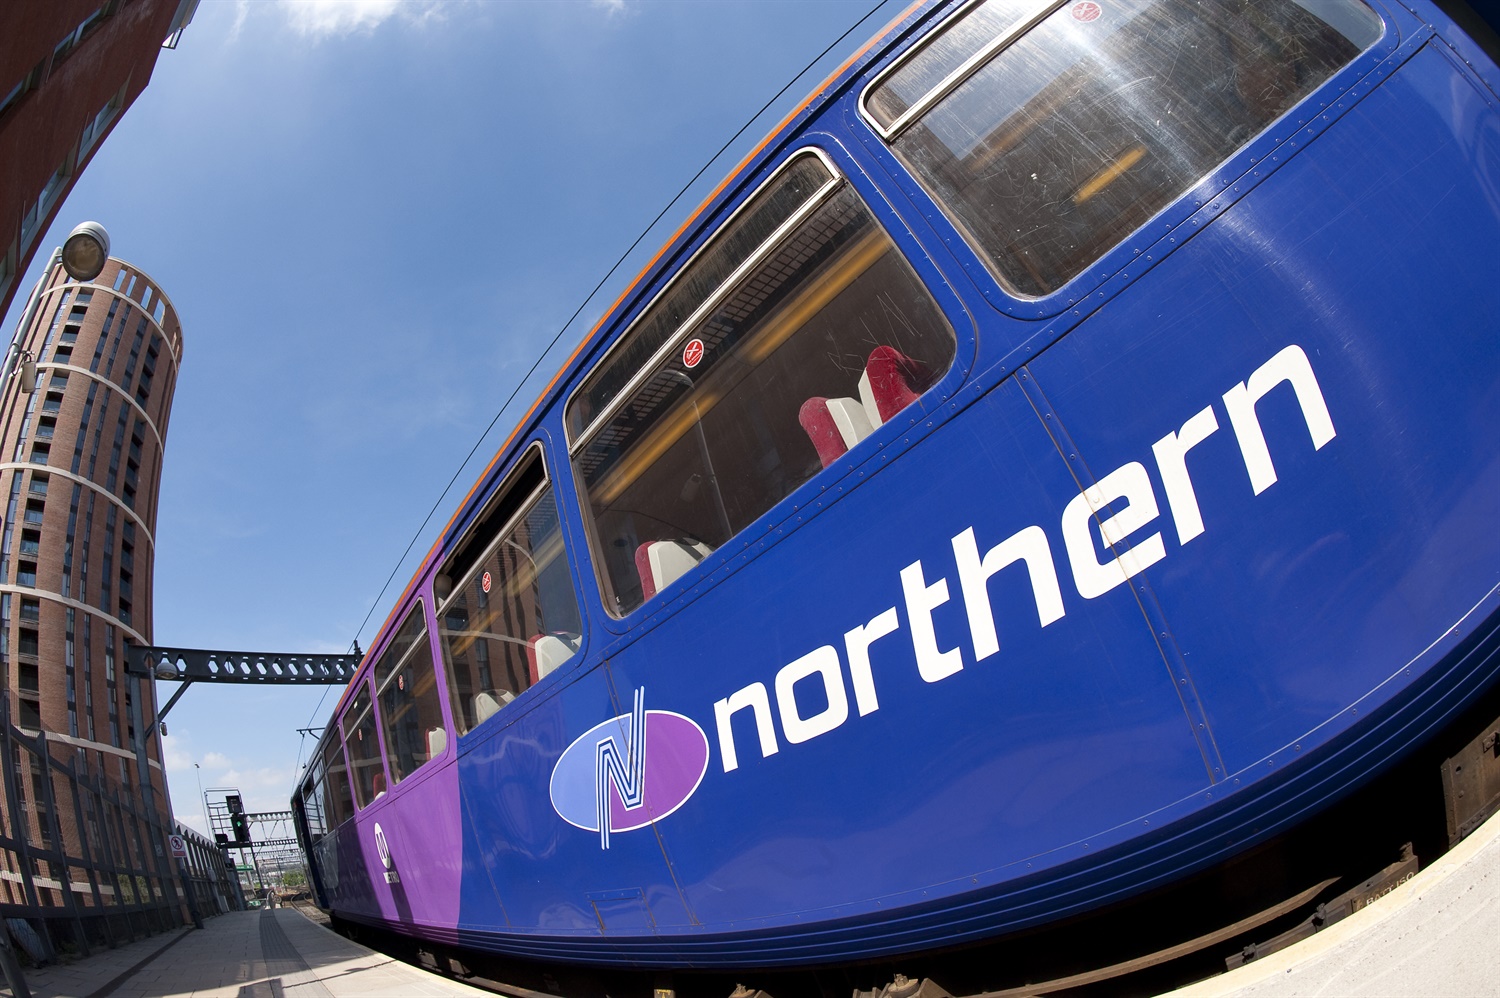 Northern passengers to receive special compensation after May timetable chaos